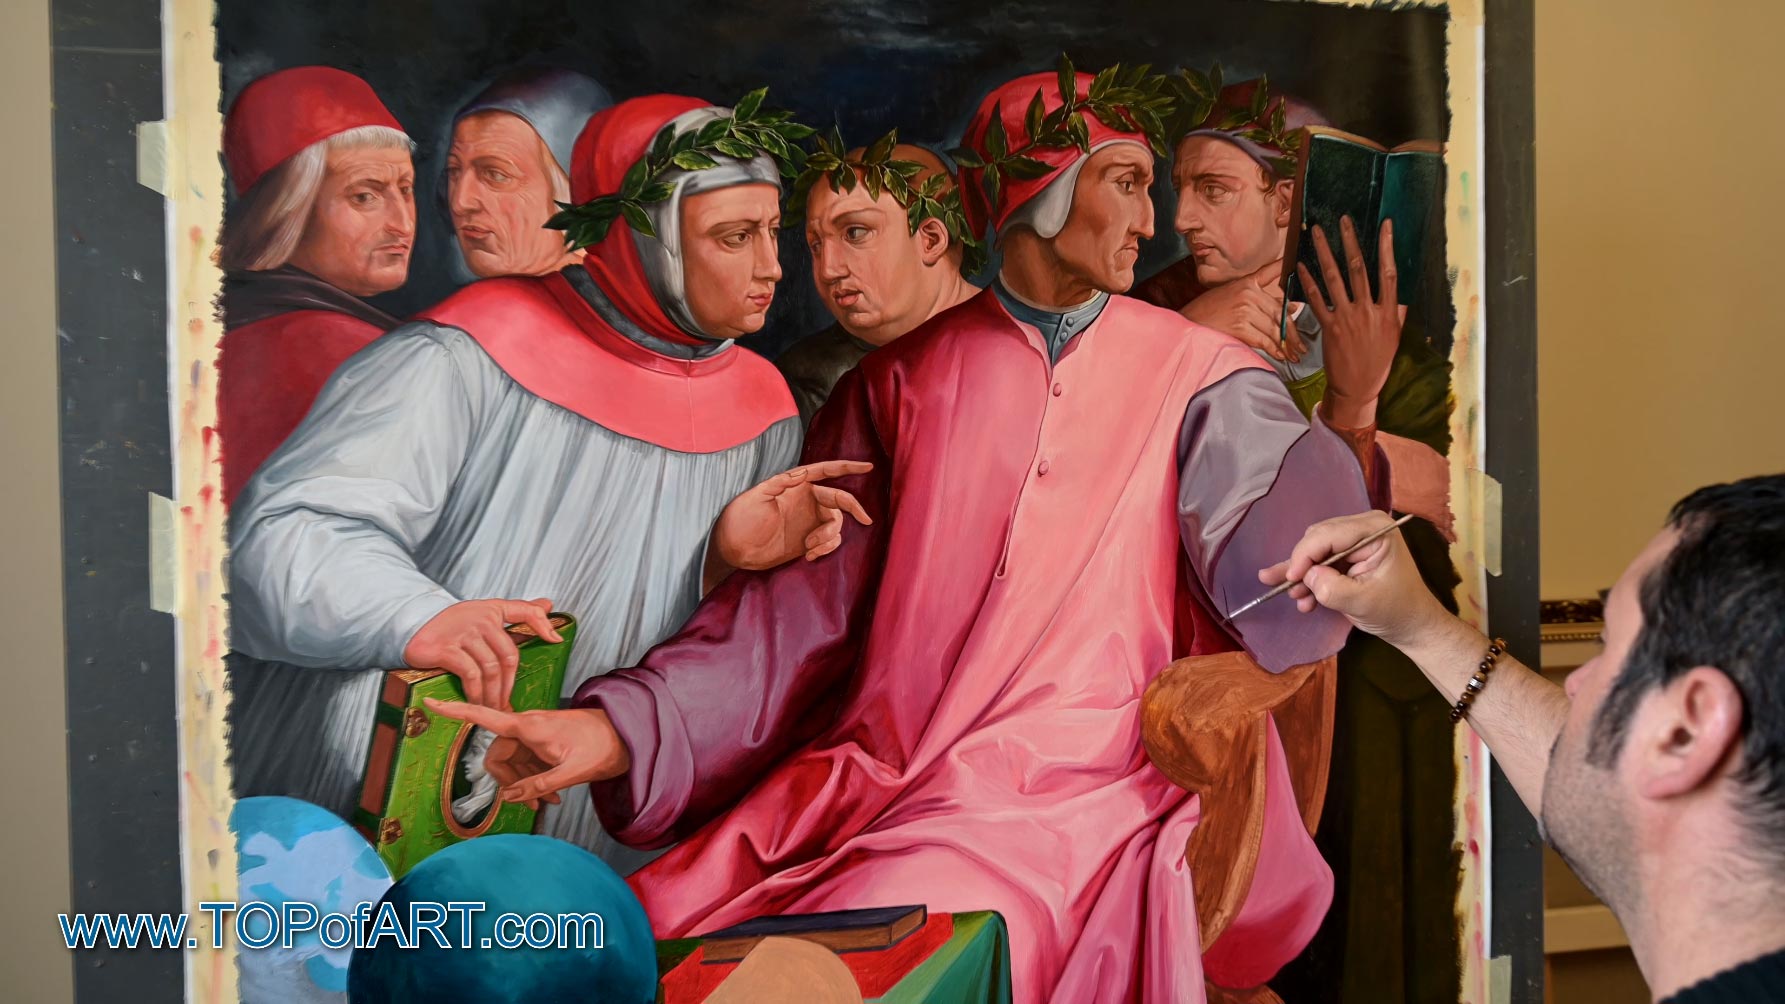 Giorgio Vasari - "Portrait of Six Tuscan Poets" - Process of Creation of the Painting